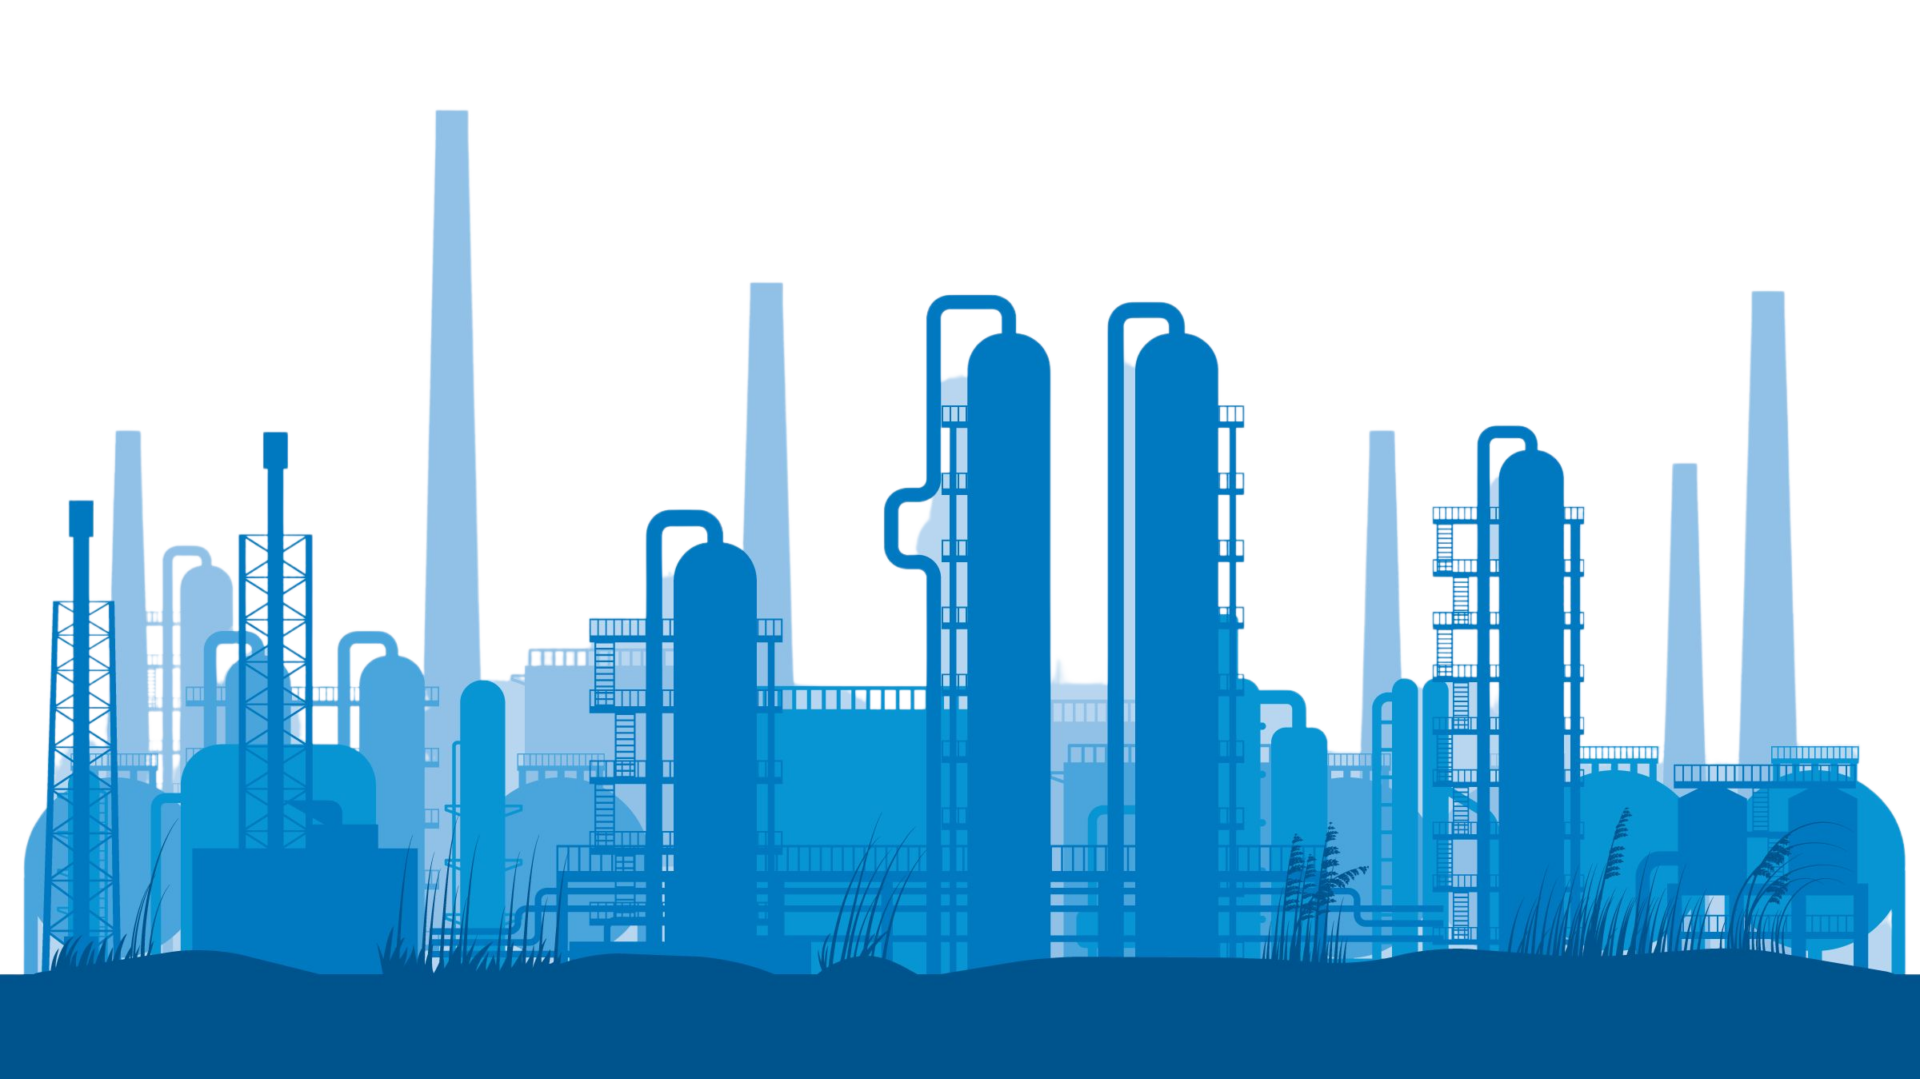 Vector illustration of a refinery silhouette against a blue background.